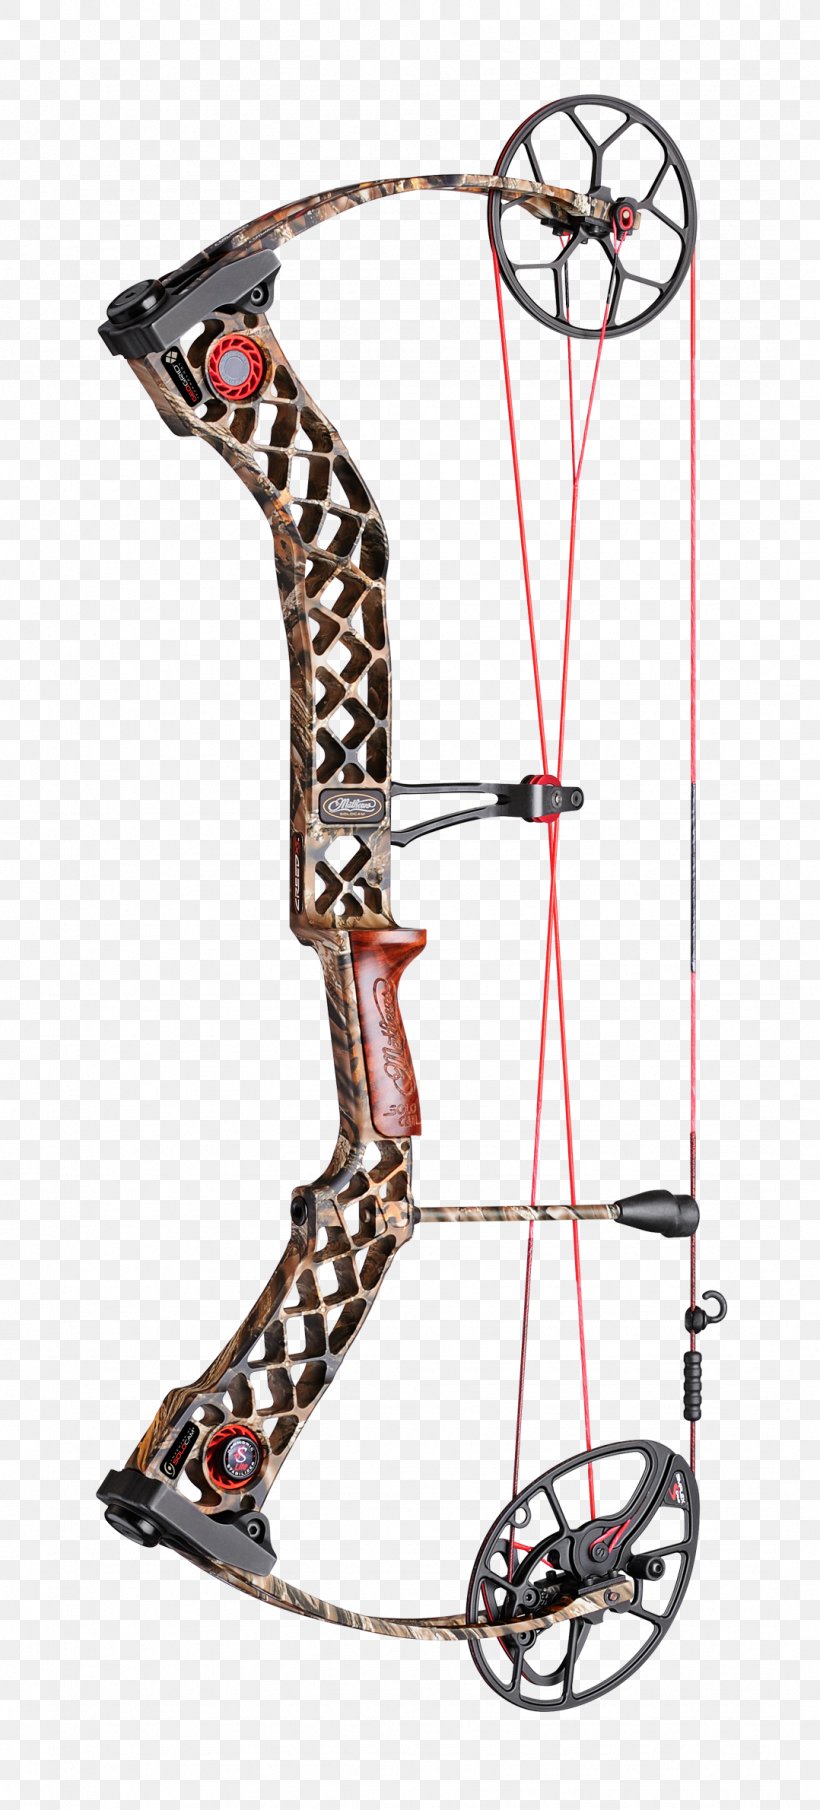 Bowhunting Compound Bows Bow And Arrow, PNG, 1078x2380px, Bowhunting, Archery, Bow, Bow And Arrow, Compound Bow Download Free